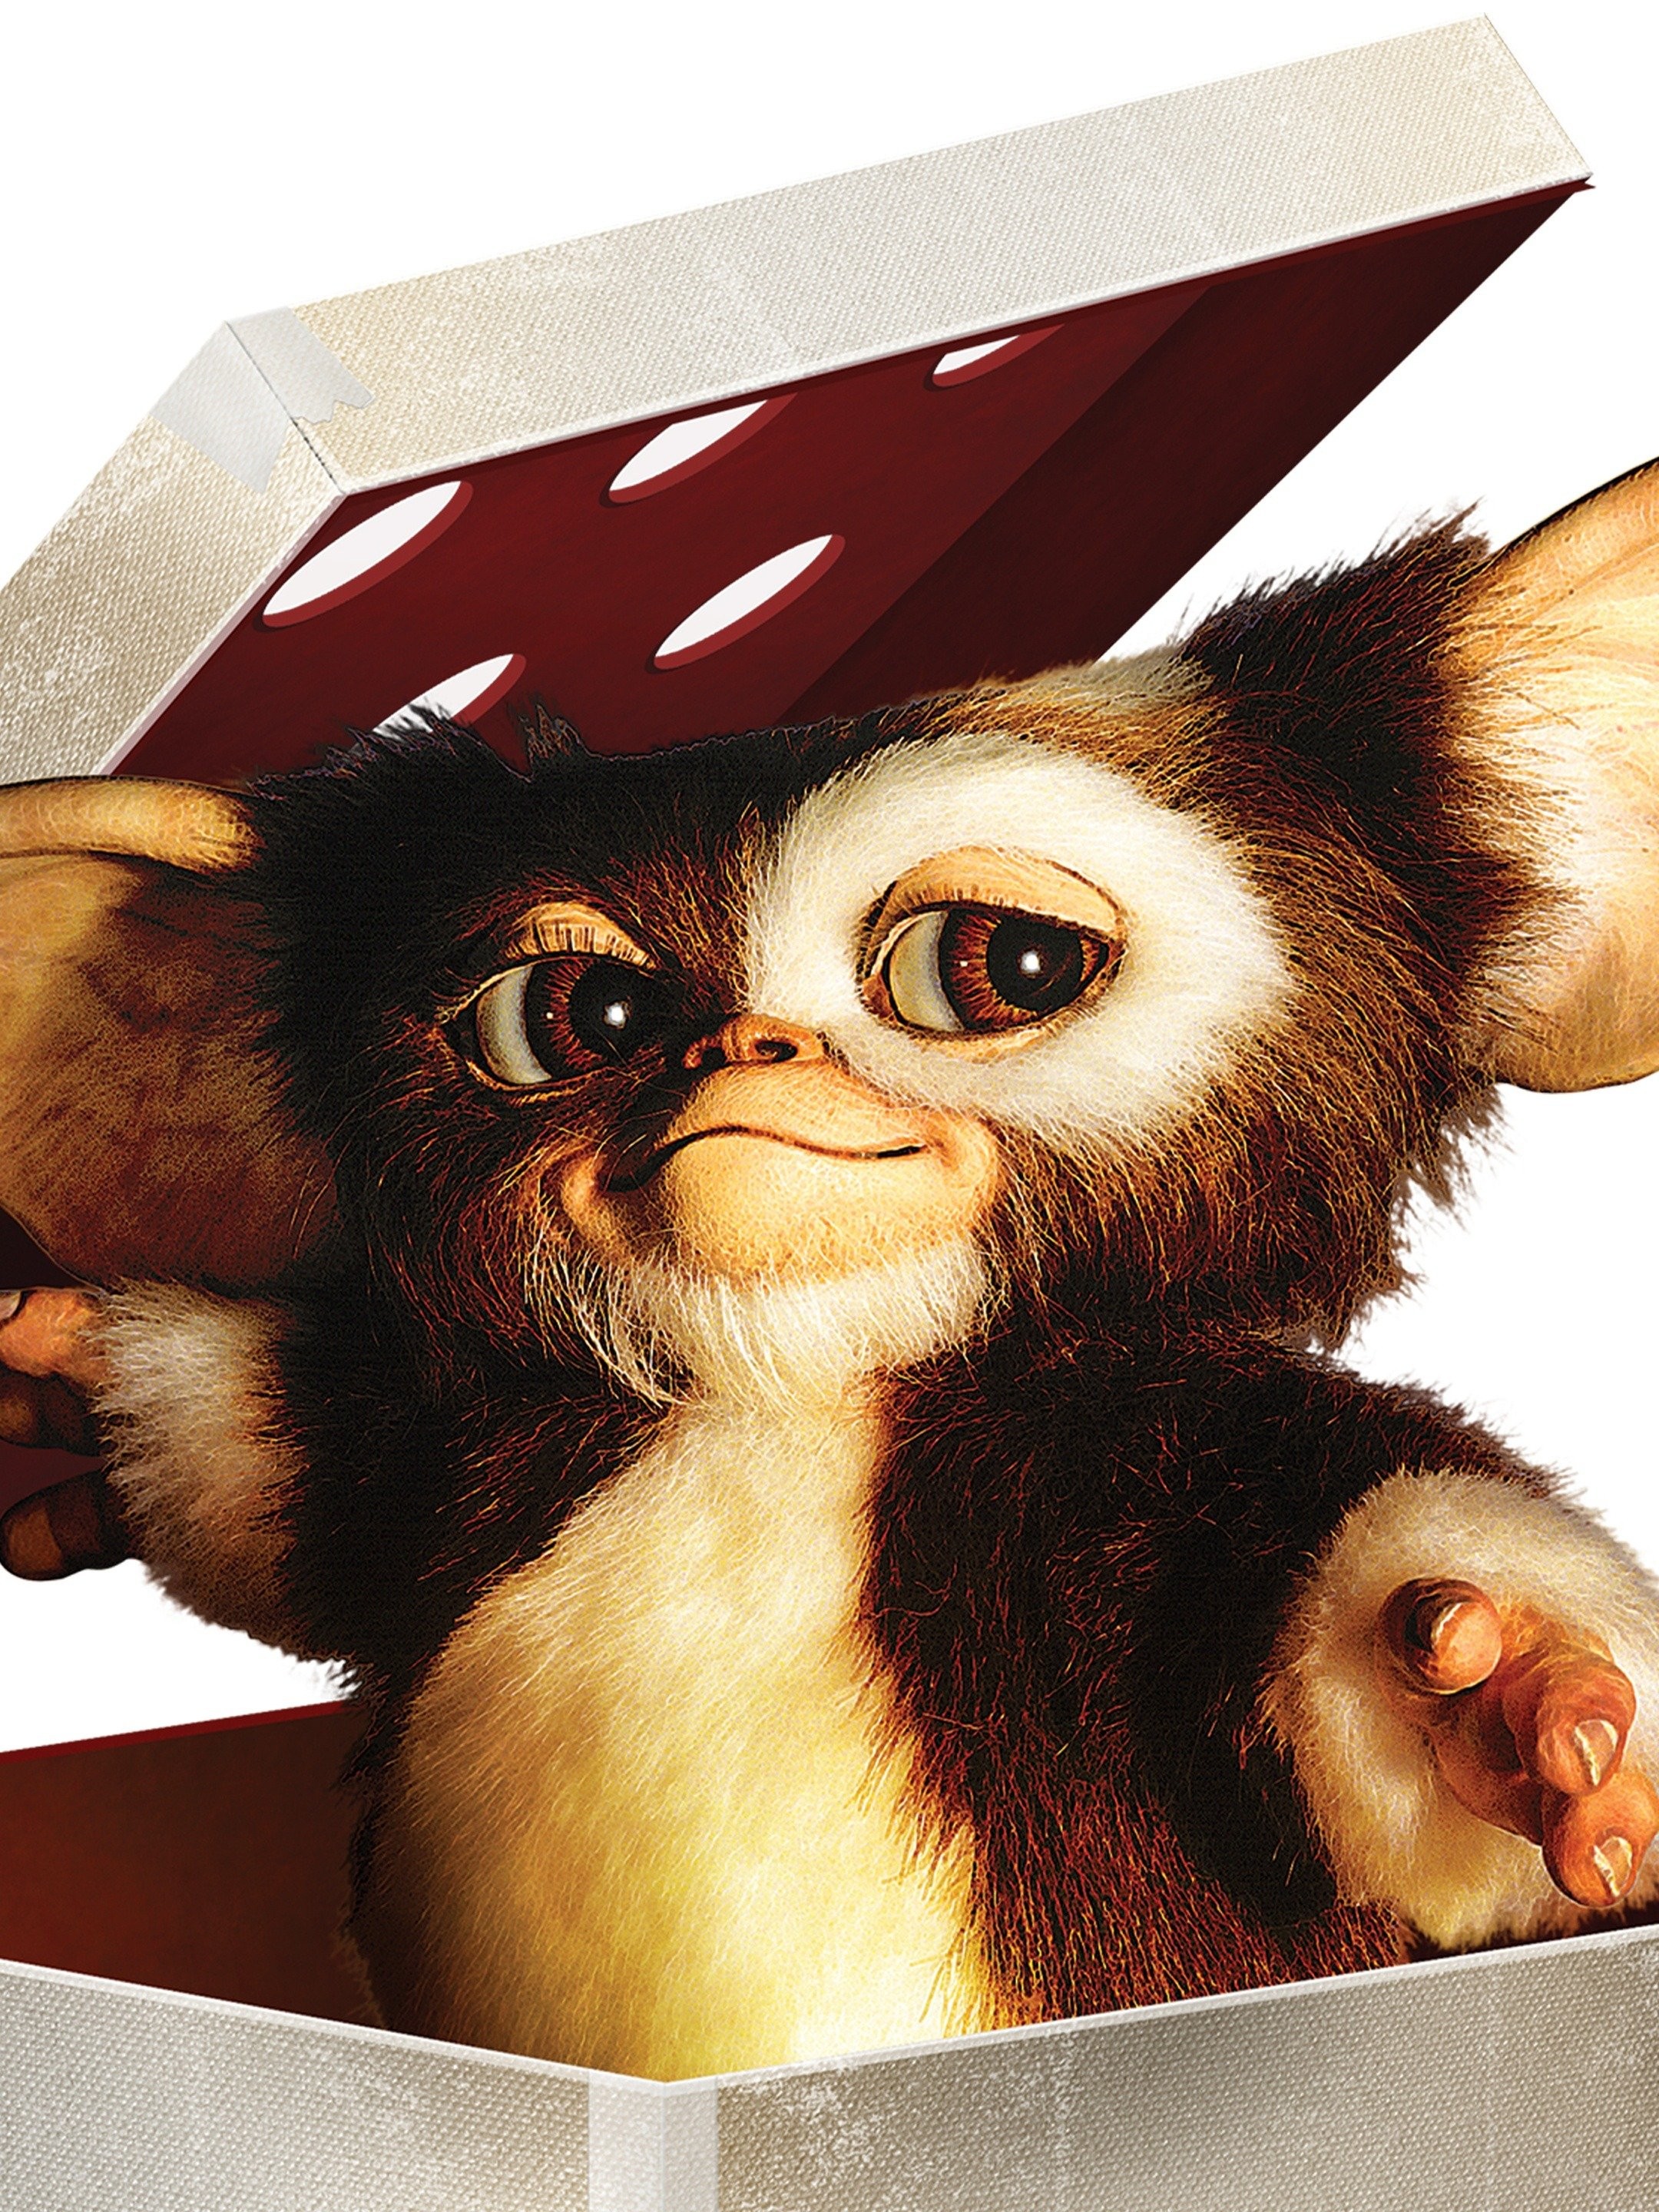 Gremlins  Rotten Tomatoes